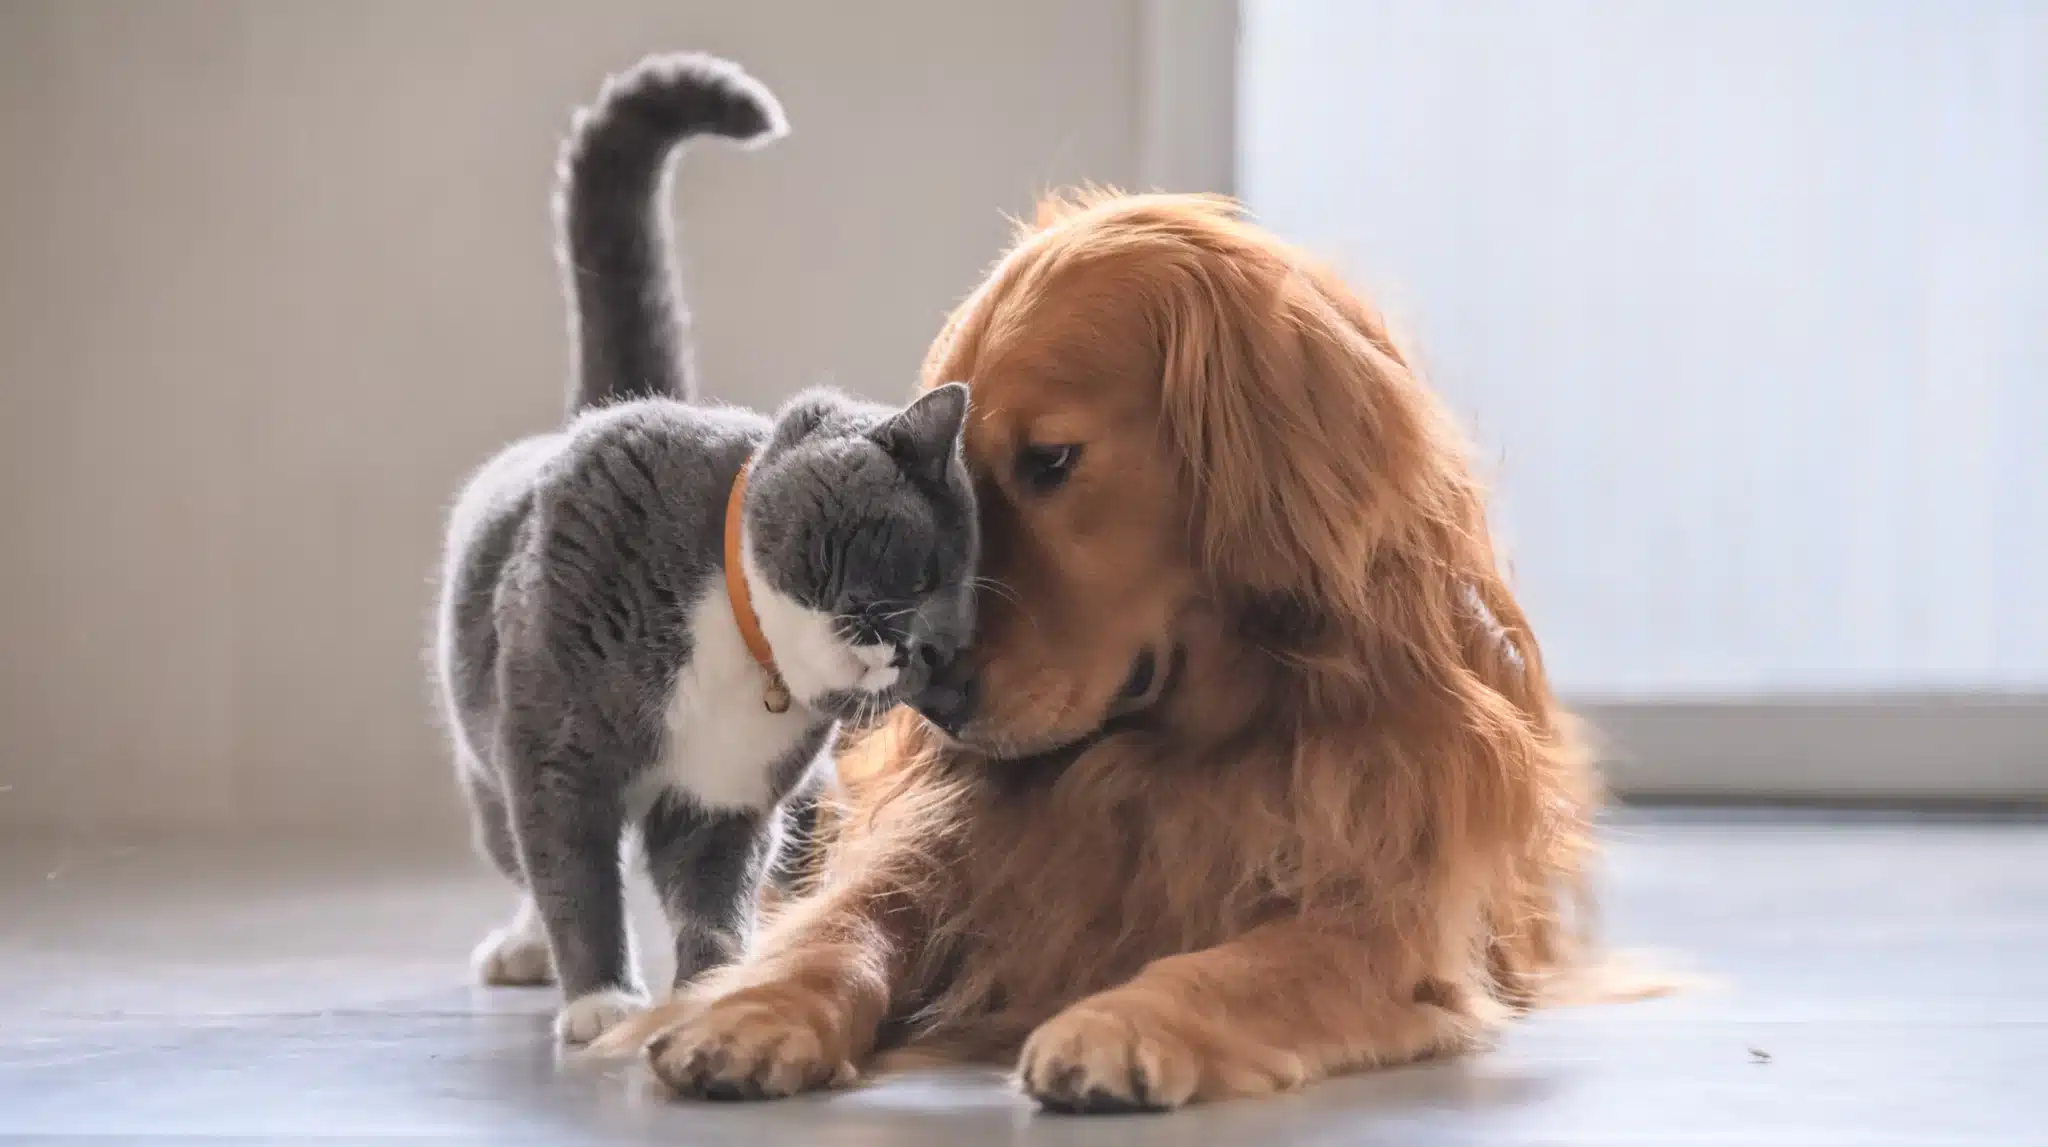 A golden retriever and a gray cat nuzzling noses. Get a free pet insurance quote today!